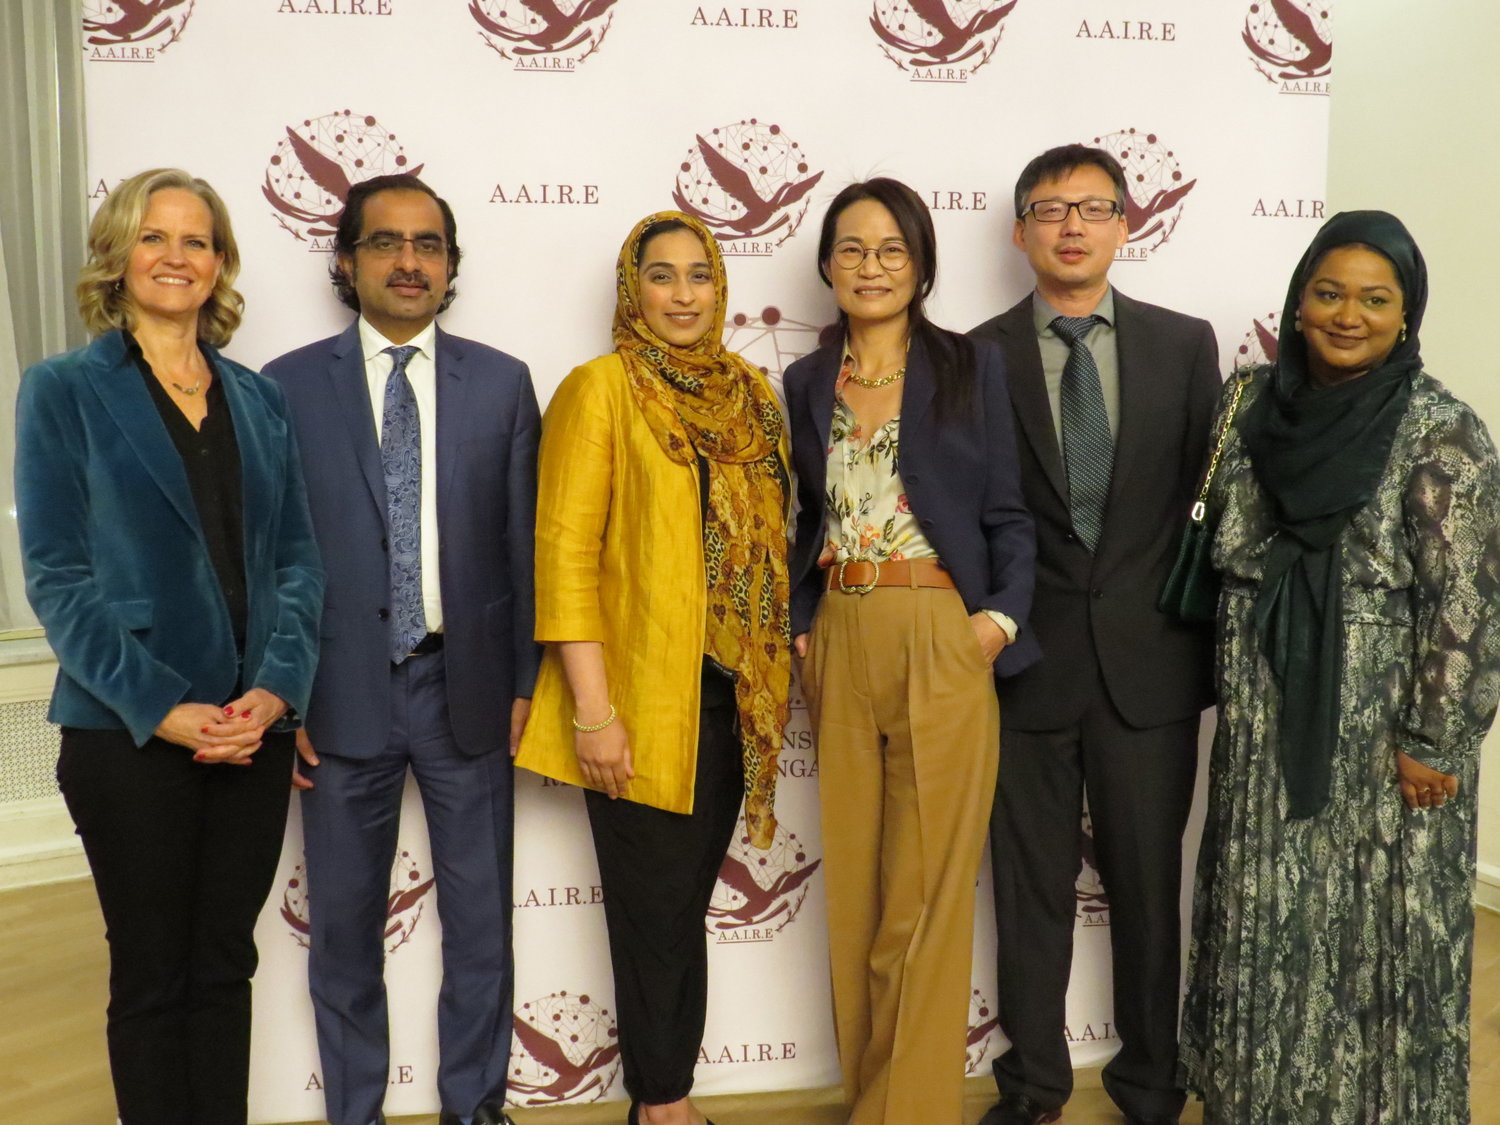 The board of the Asian American Institute for Research and Engagement includes, from left, Laura Curran, Dr. Ijaz Ahmad, Farrah Mozawalla, Cherry Huang, Dawei Zhou and Dr. Sadia Chaudhury.